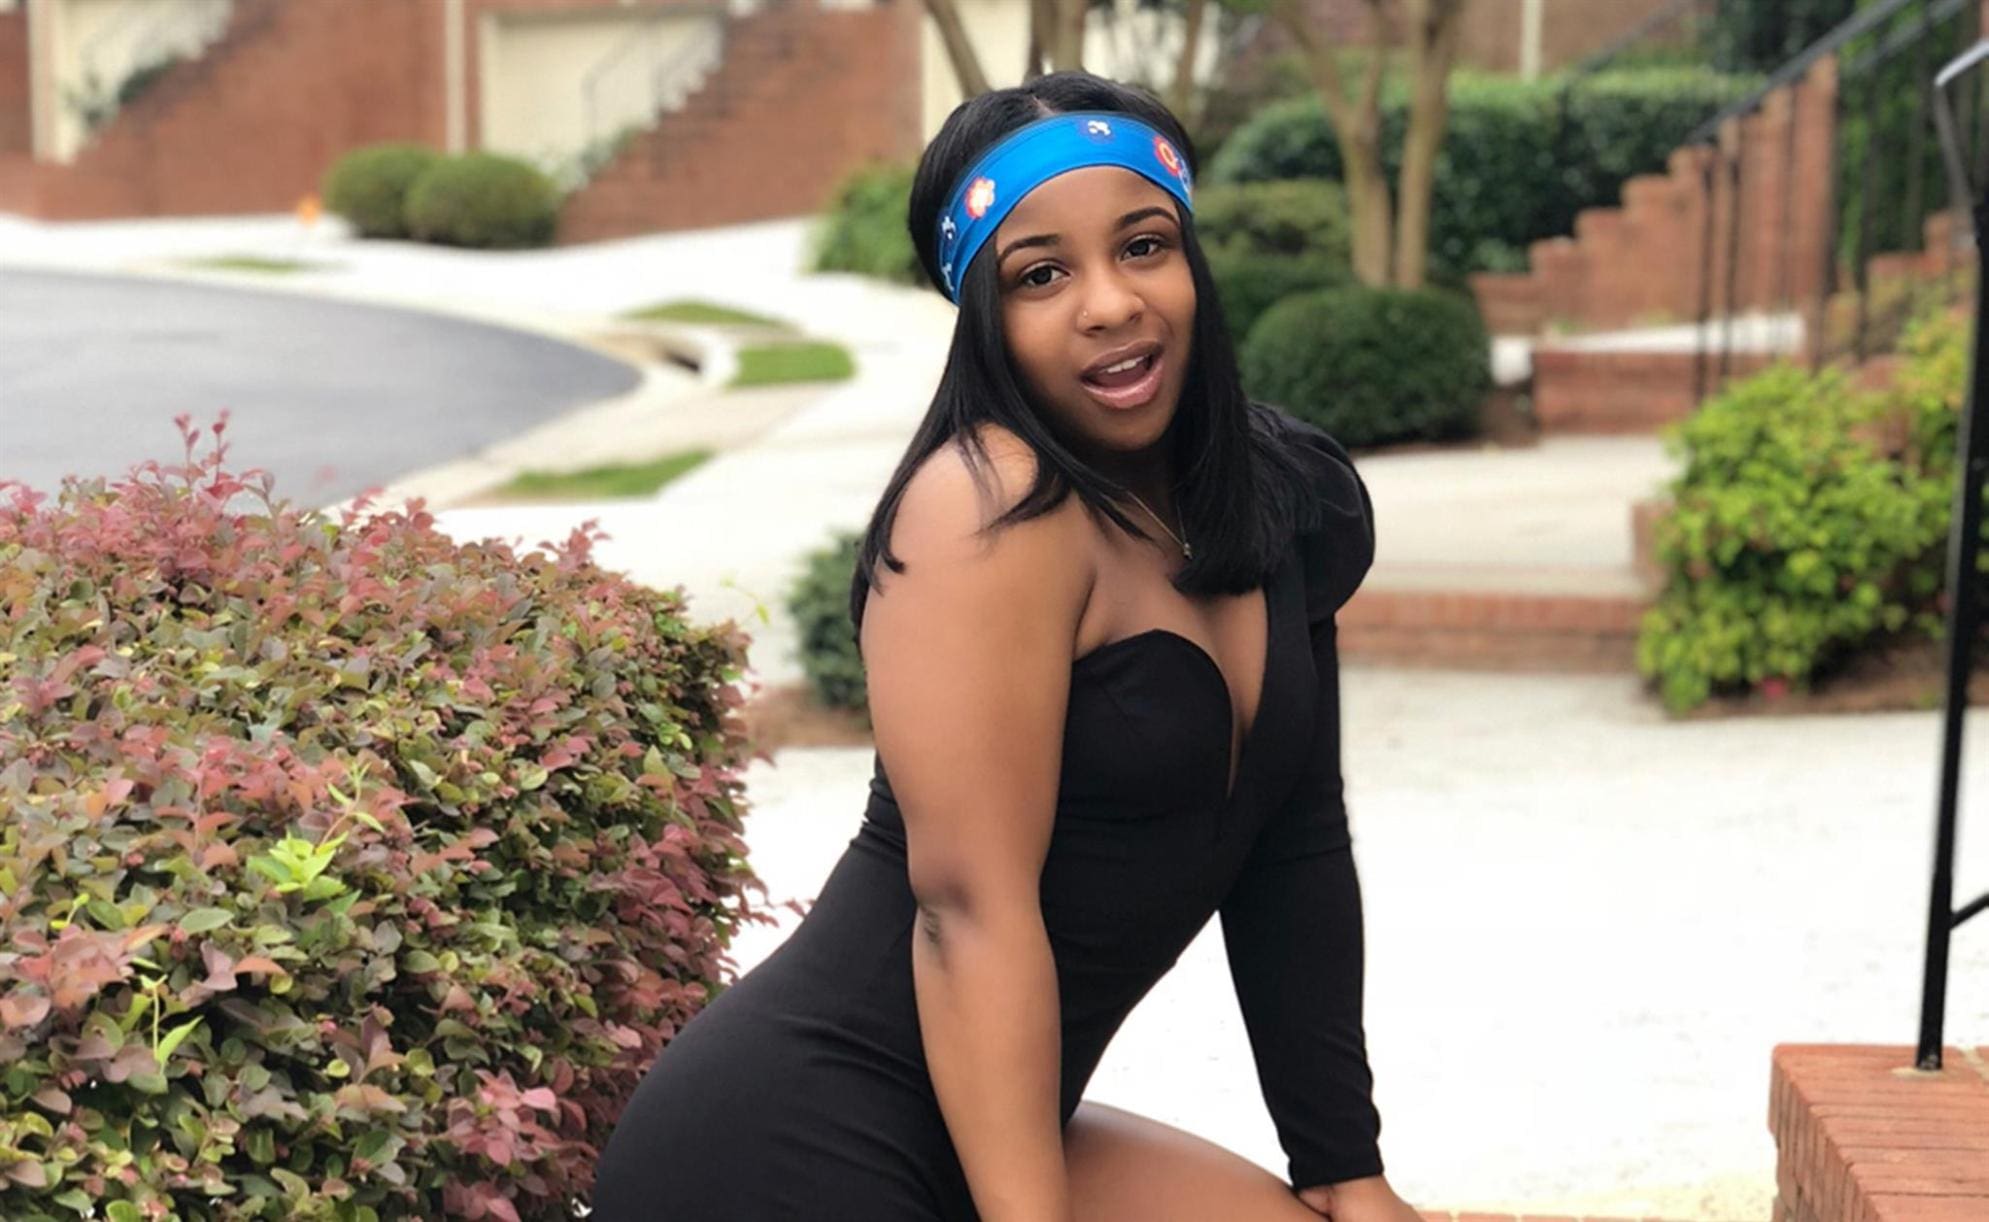 Reginae Carter Opens Up About Being At The Controversial 'Cucumber' Party - See What She Says About YFN Lucci And Her Whole Way Of Handling Things So Far